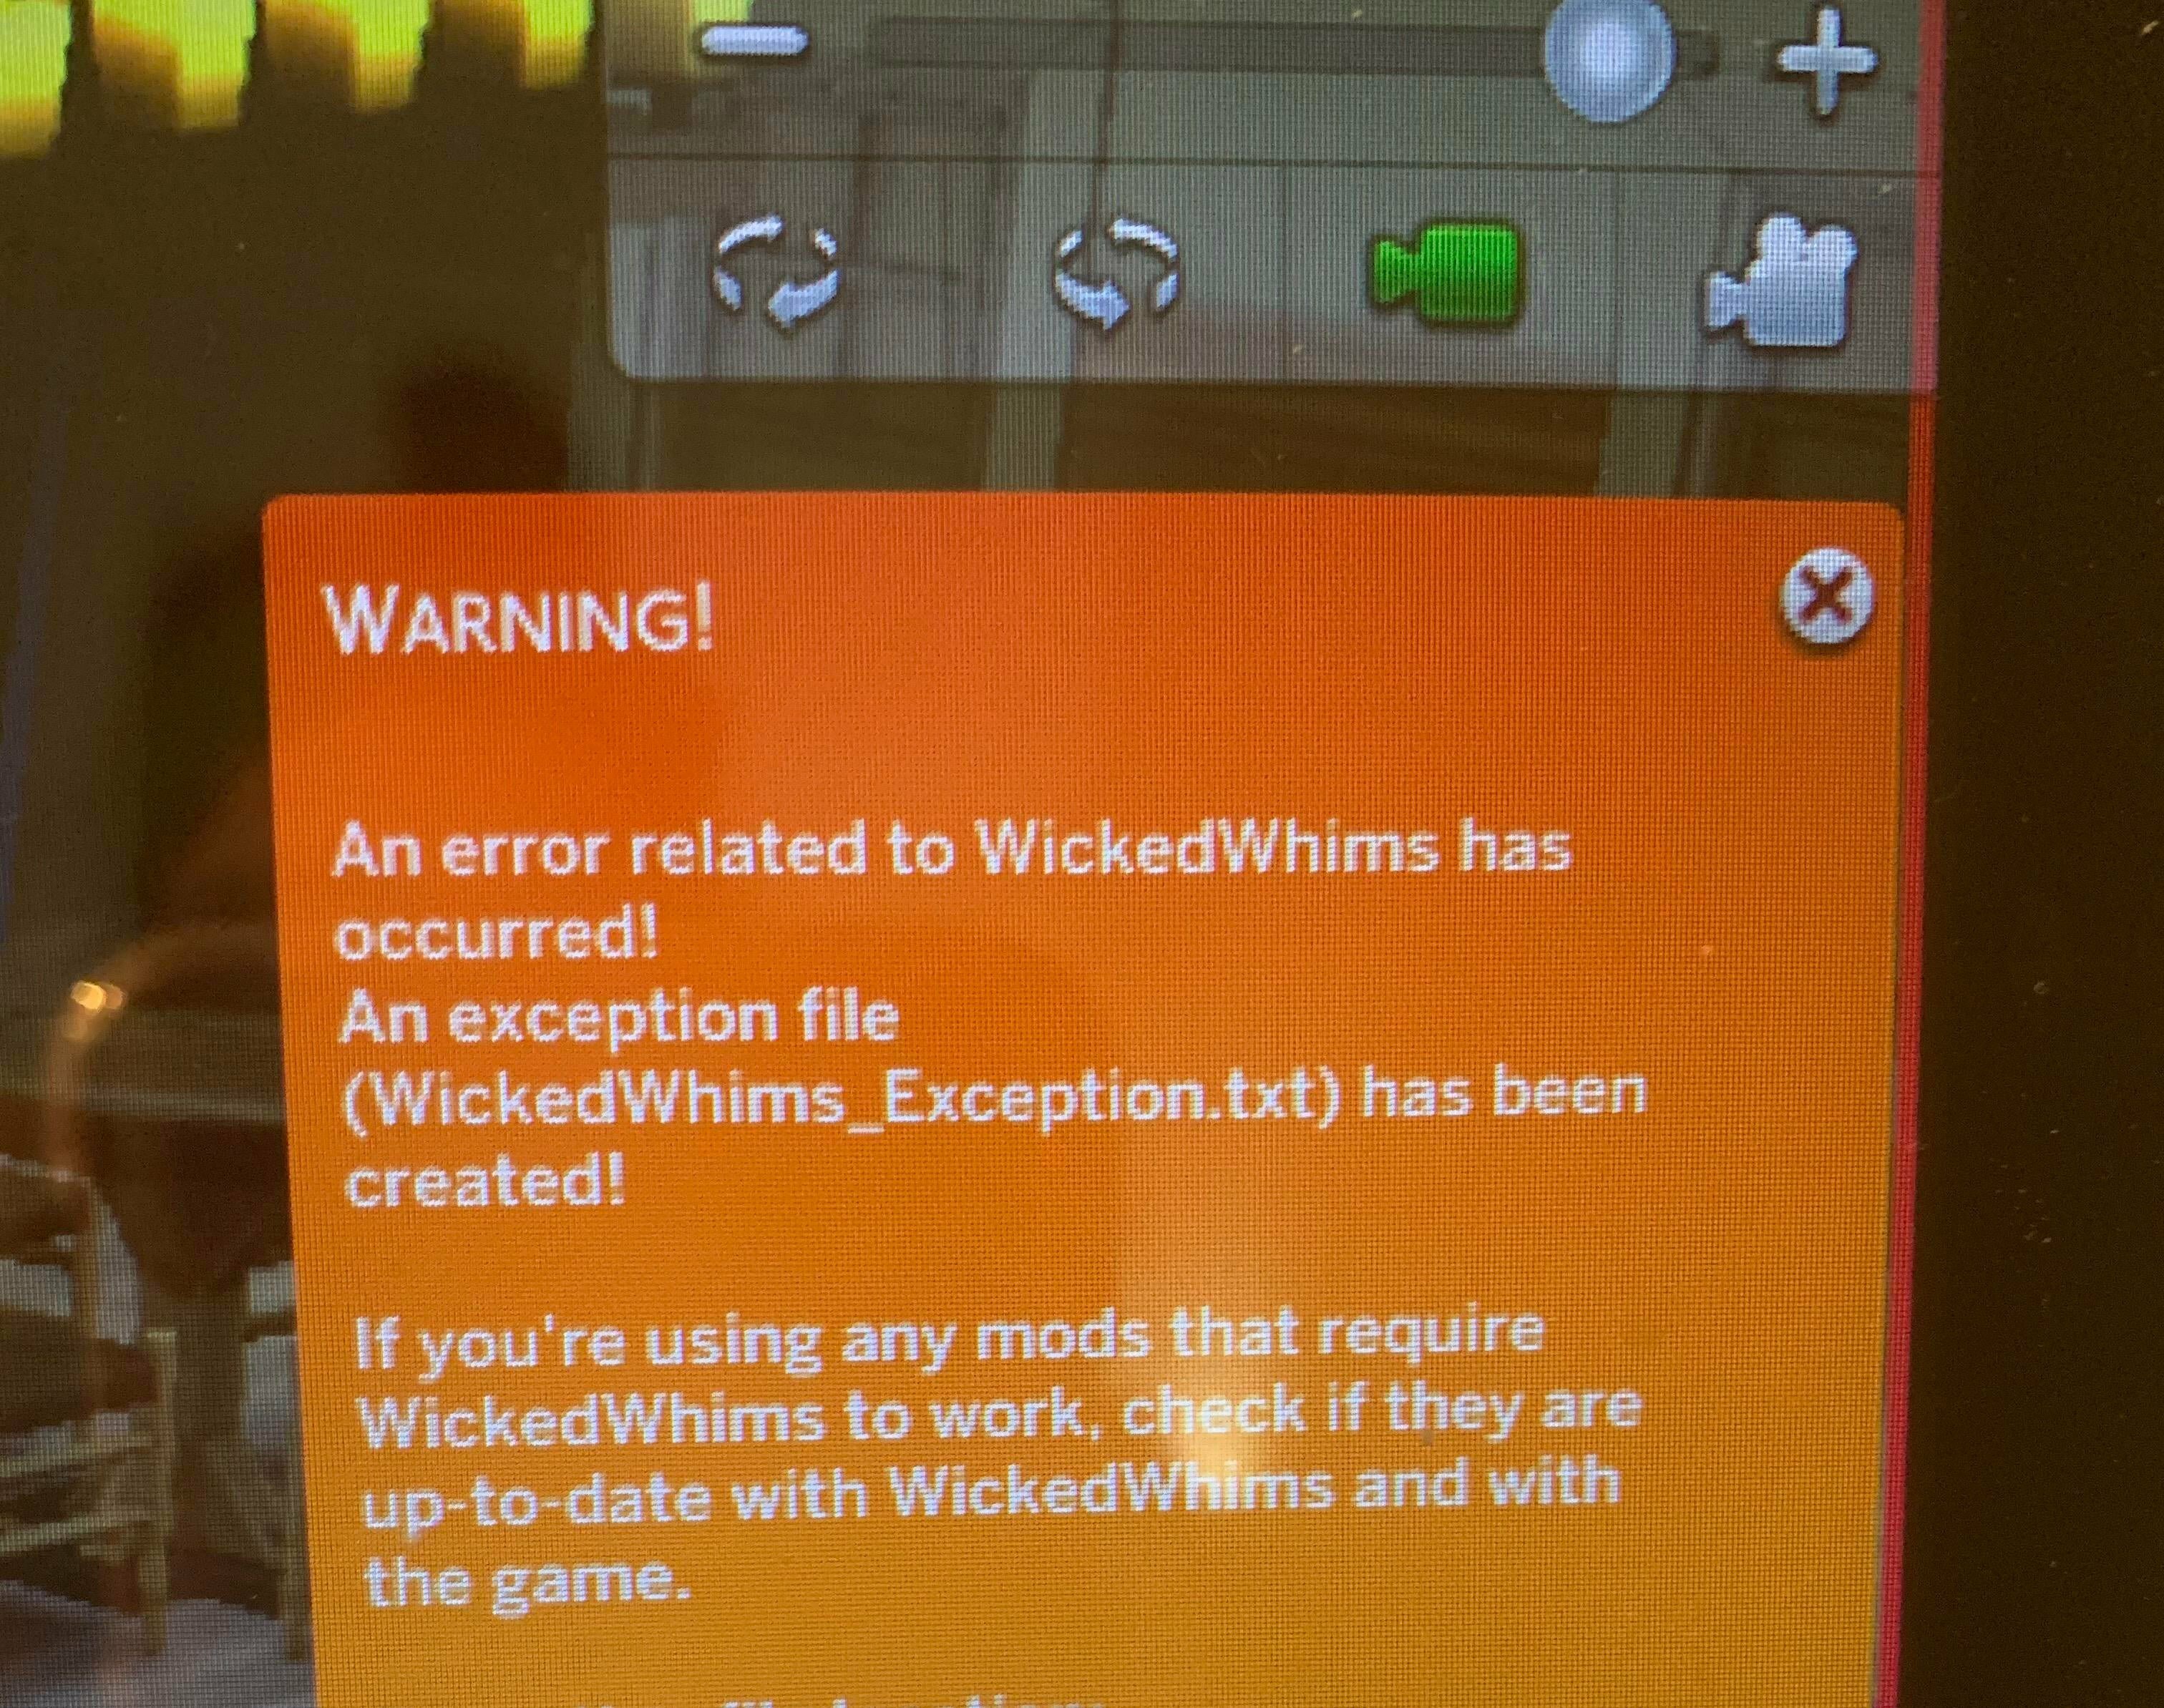 Exception txt. An exception file wicjedwhims как исправить. An Error potentially related to wickedwhims has occurred. Произошла ошибка потенциально связанная с wickedwhims что делать.